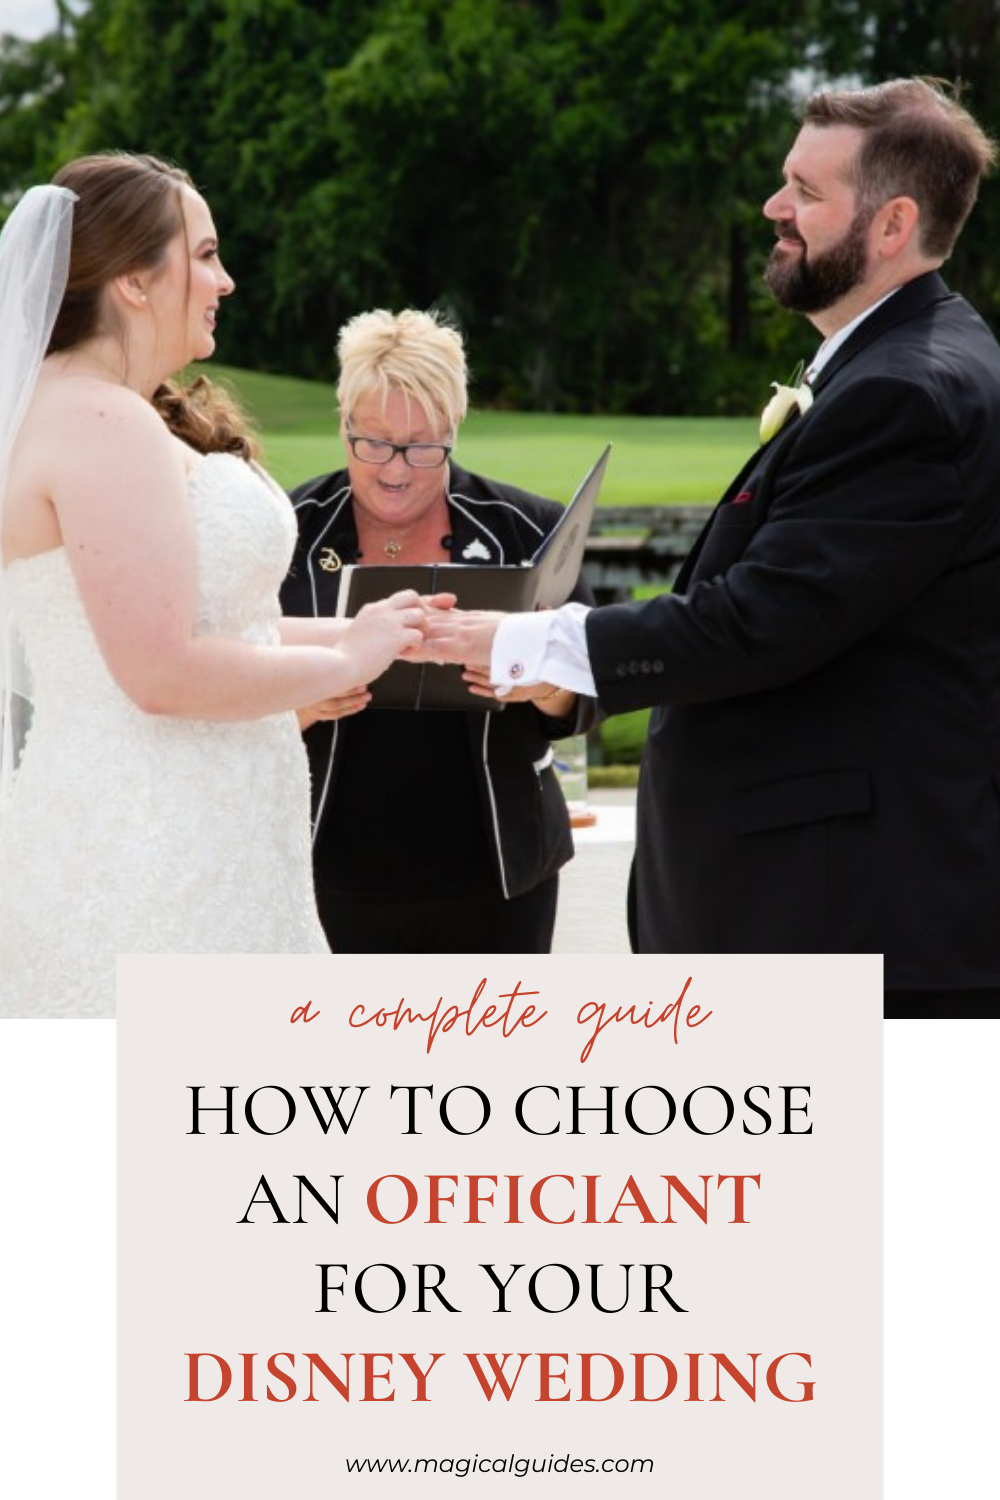 Choosing a wedding officiant or any vendor for your wedding day can be overwhelming. So we created a guide to help you choose an officiant for your wedding with tips from our wedding officiant Katherine T. Imundi. Our review of Katherine T. Imundi from our April 2021 wedding. Make your Disney wedding ceremony magical or add Disney elements to your wedding.